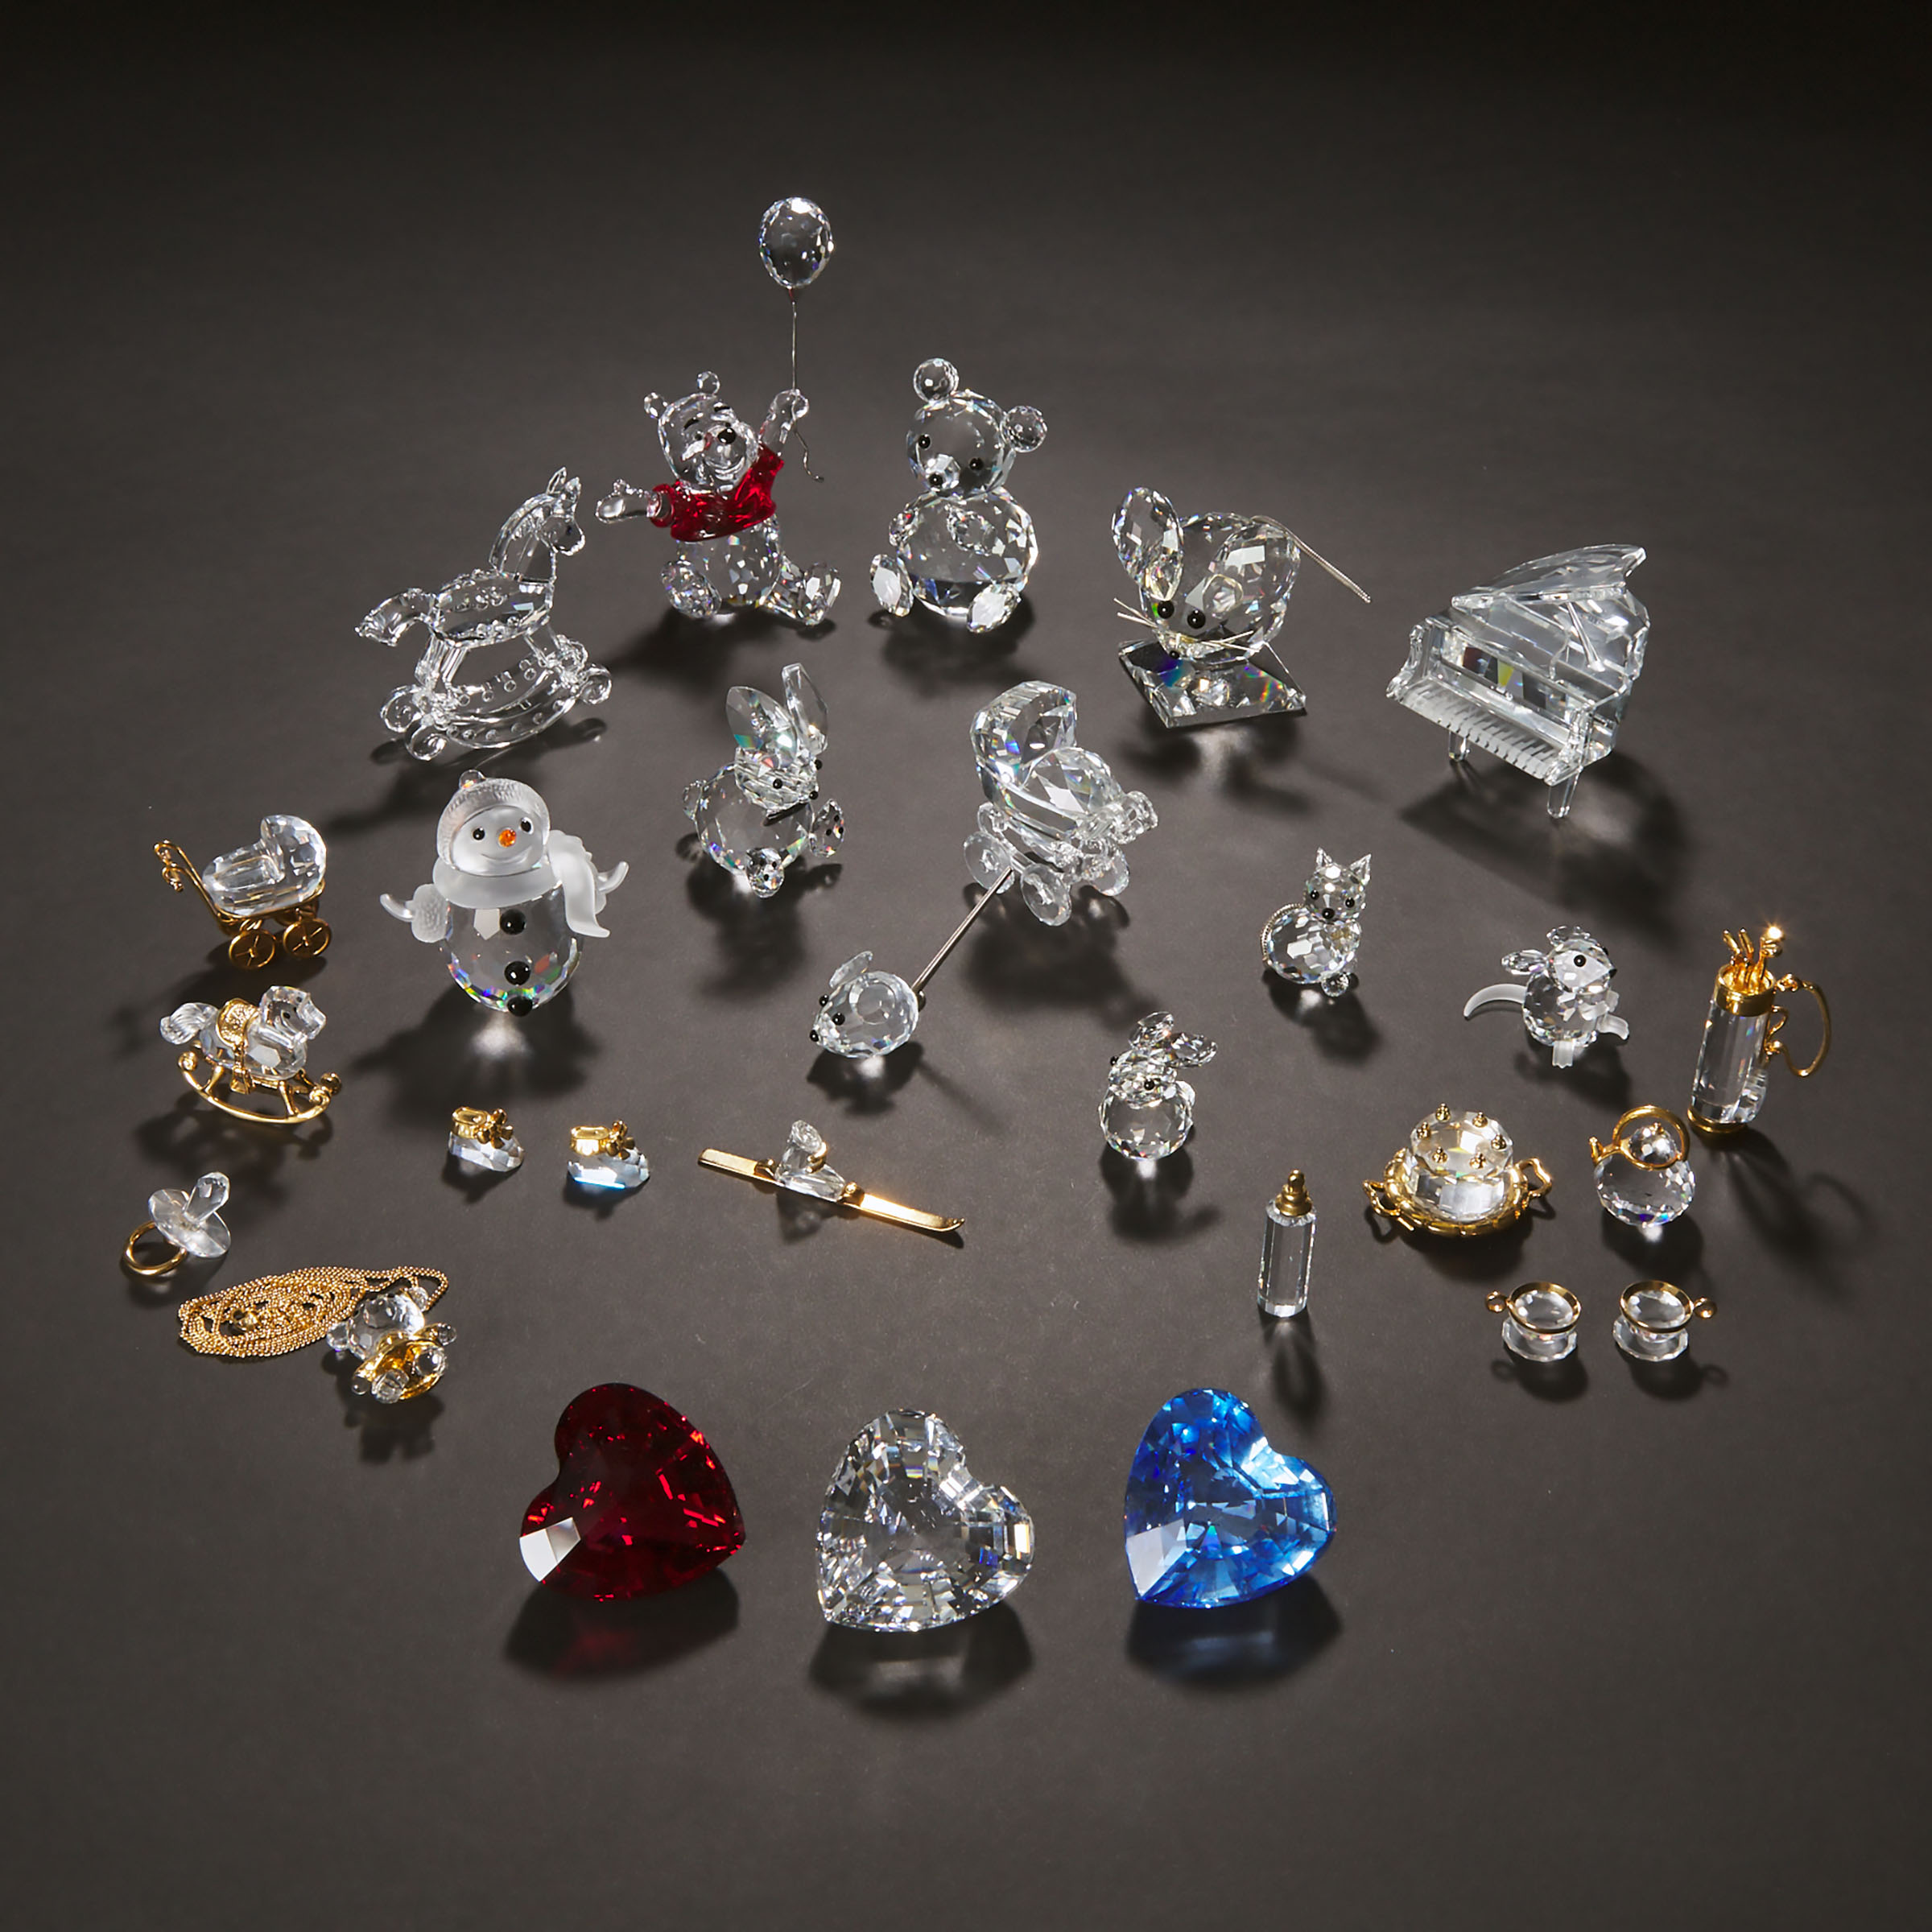 Group of Swarovski Crystal Decorative Objects, late 20th/early 21st century